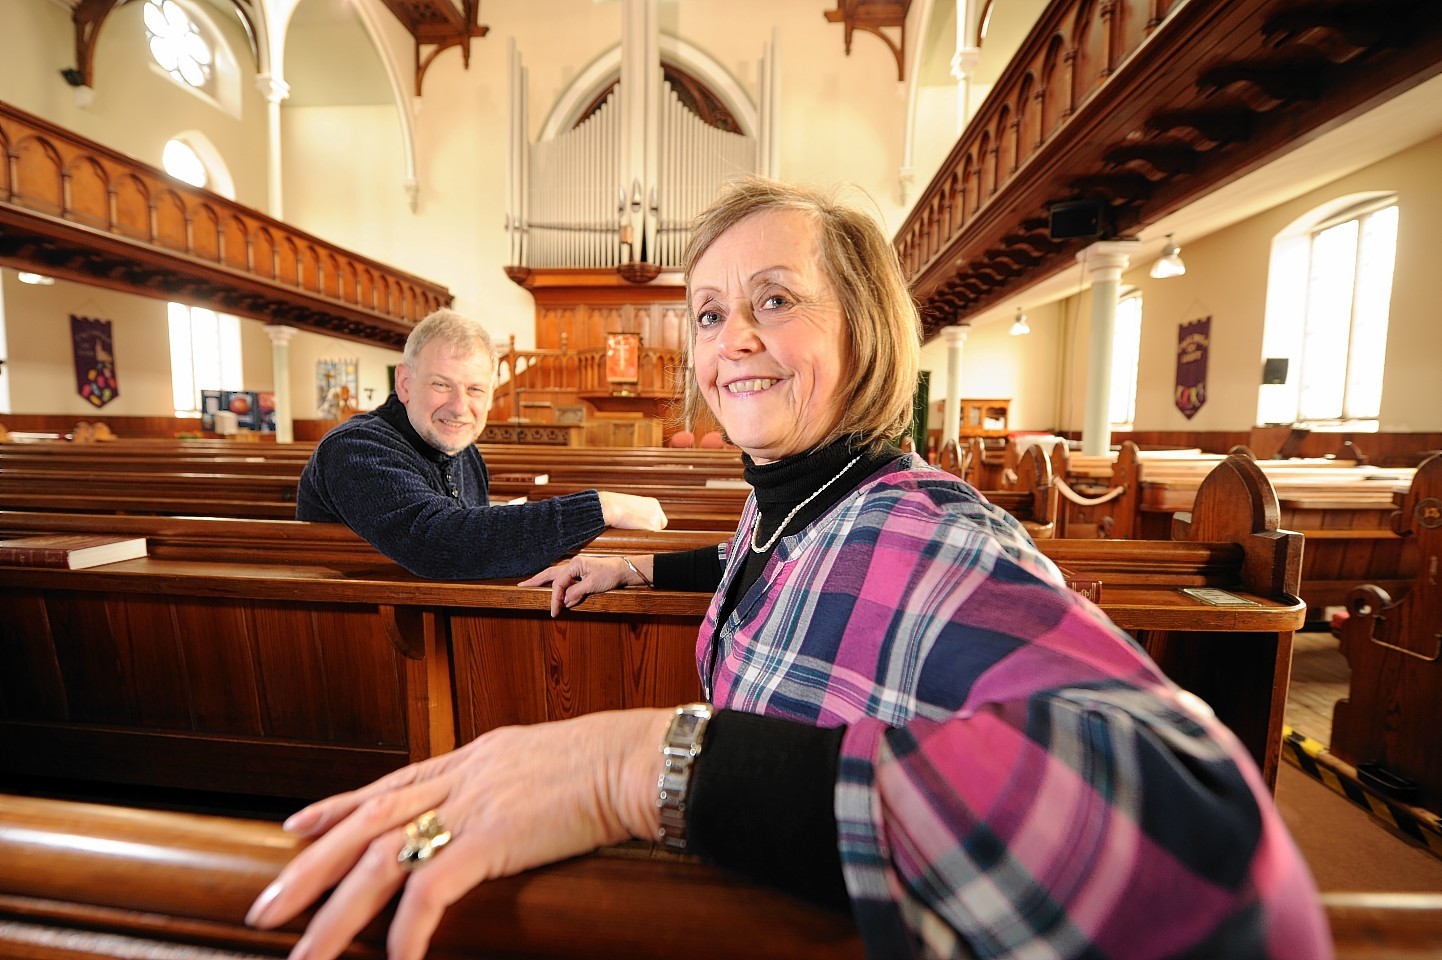 Sandra Paton, treasurer at St Ninians and Clifford Cooke, organ committee convenor of St Ninians Church, Nairn as their 99-year-old organ is about to have a major refurbishment.